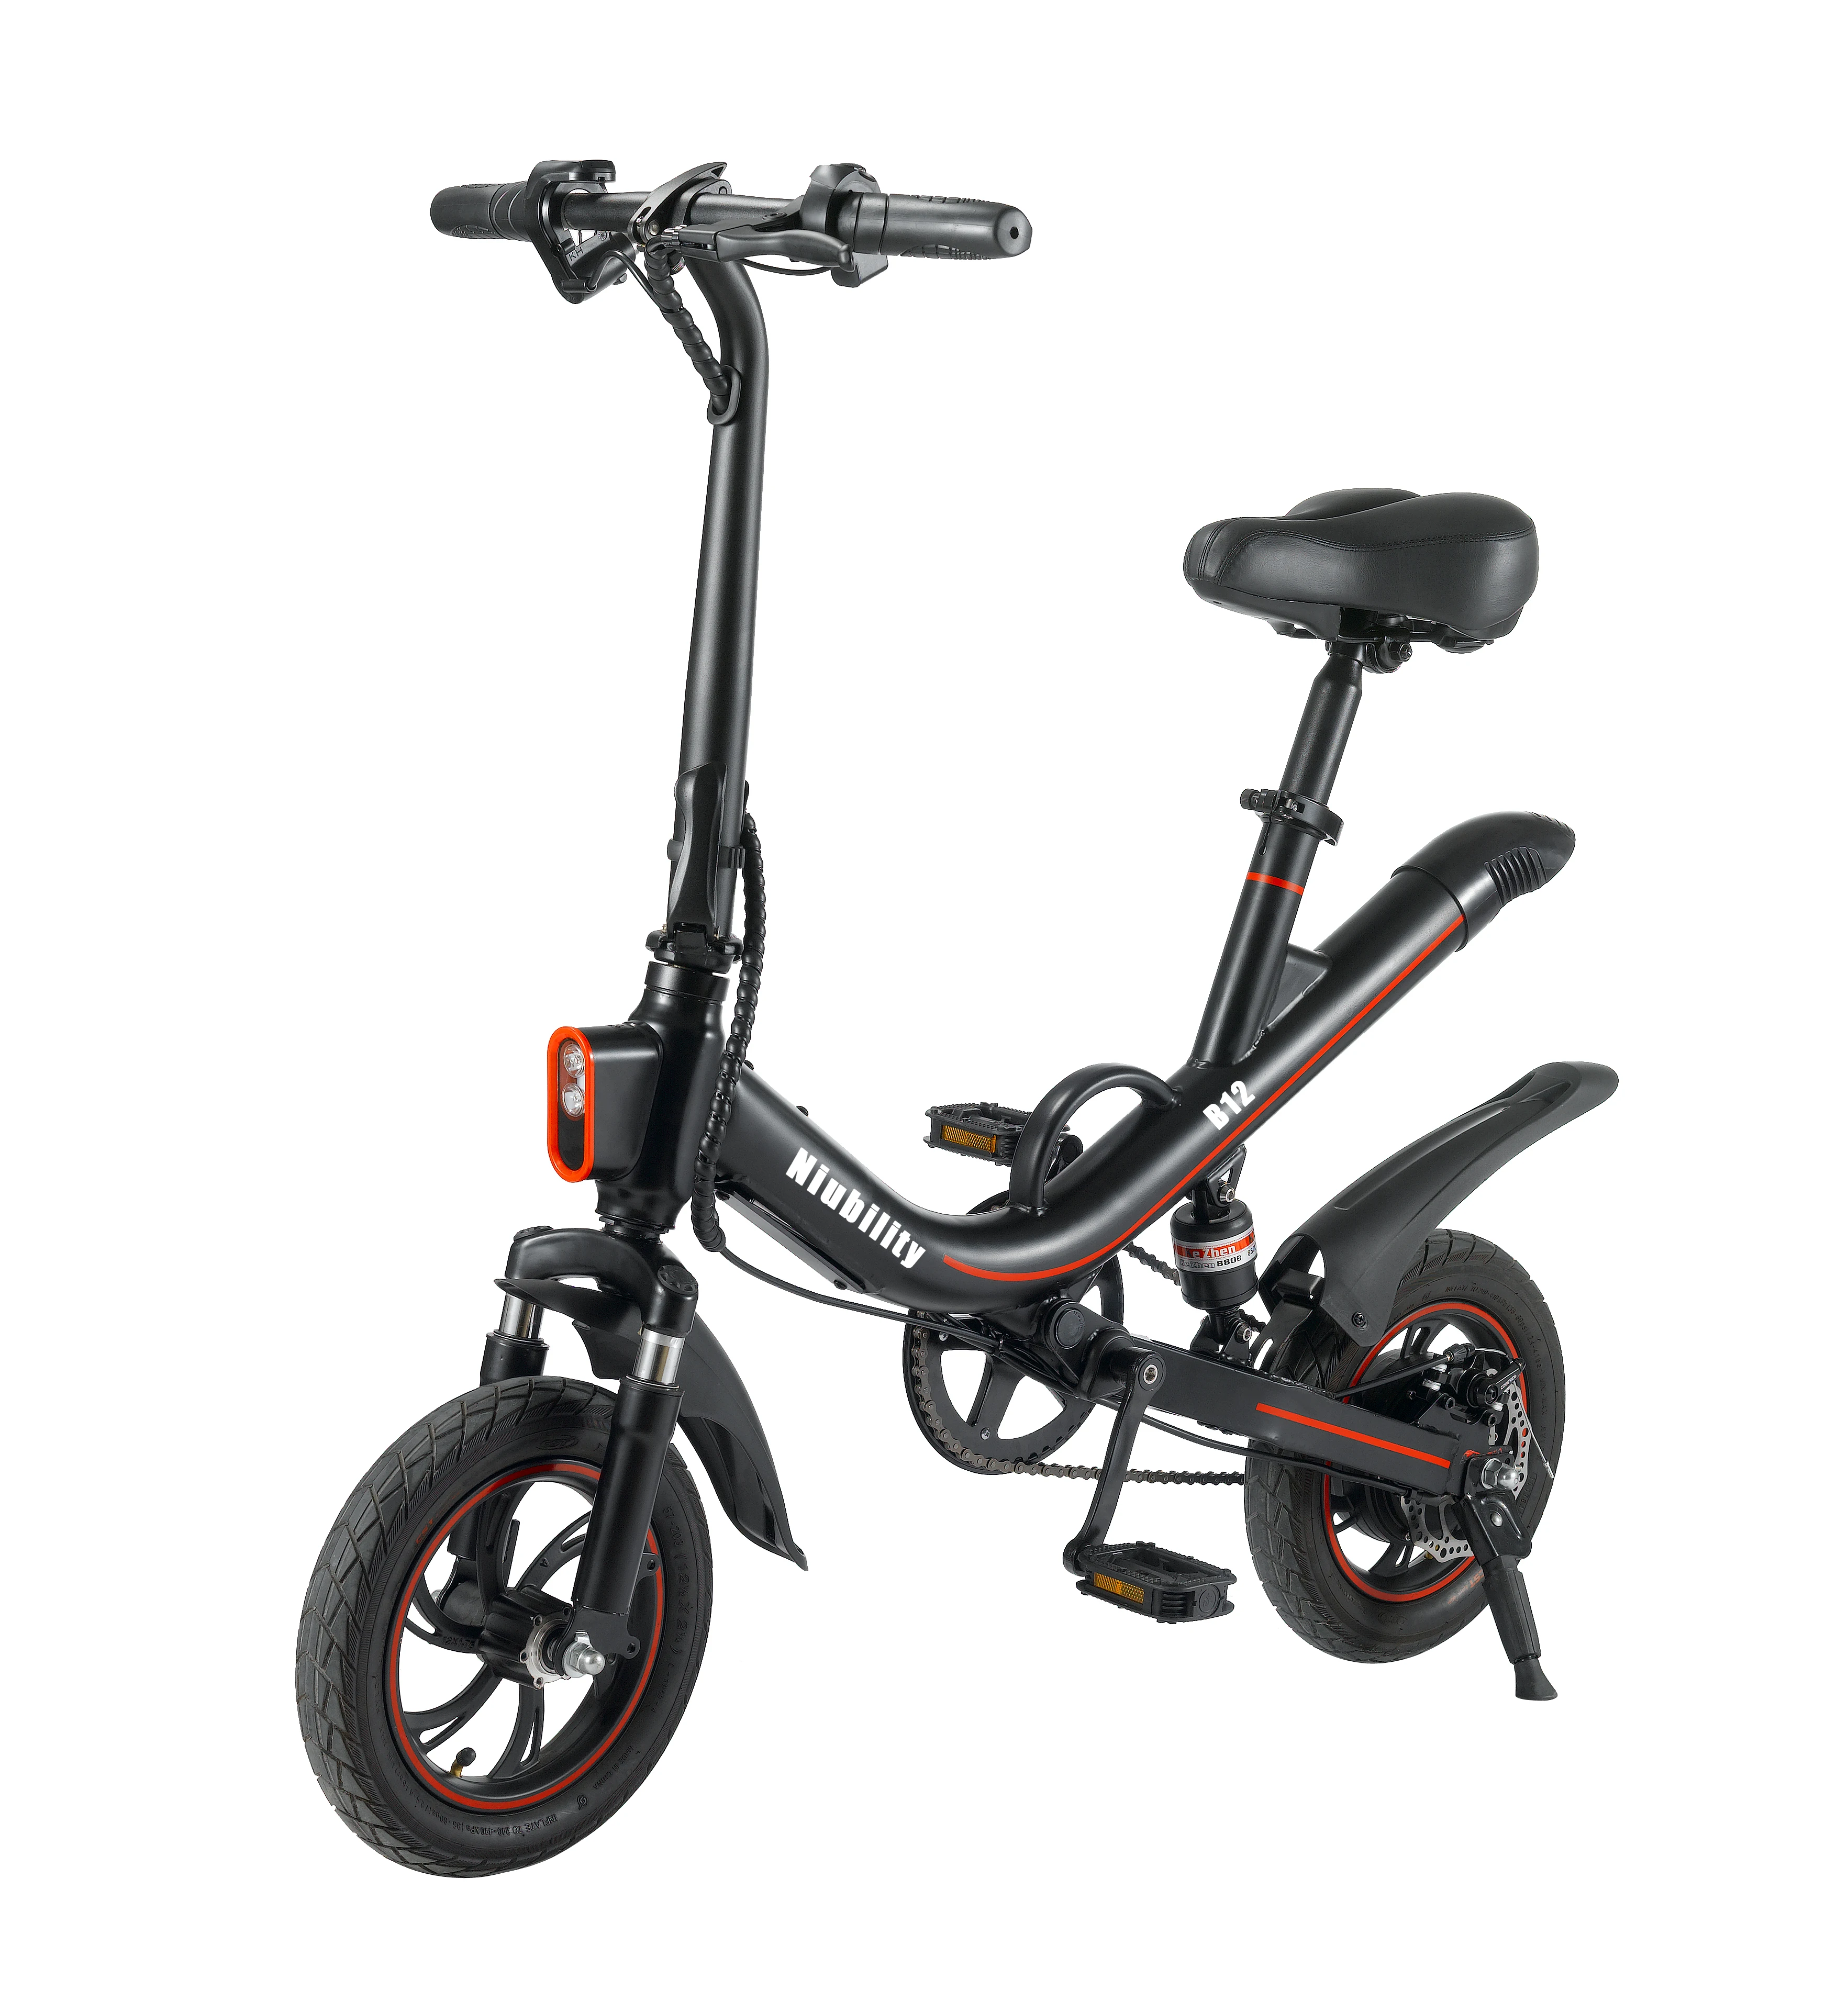 

In stock Poland warehouse 12 inch foldable electric bicycle 36V 7.8Ah battery 350w motor off road fat tyre moped electric bike, Black/white